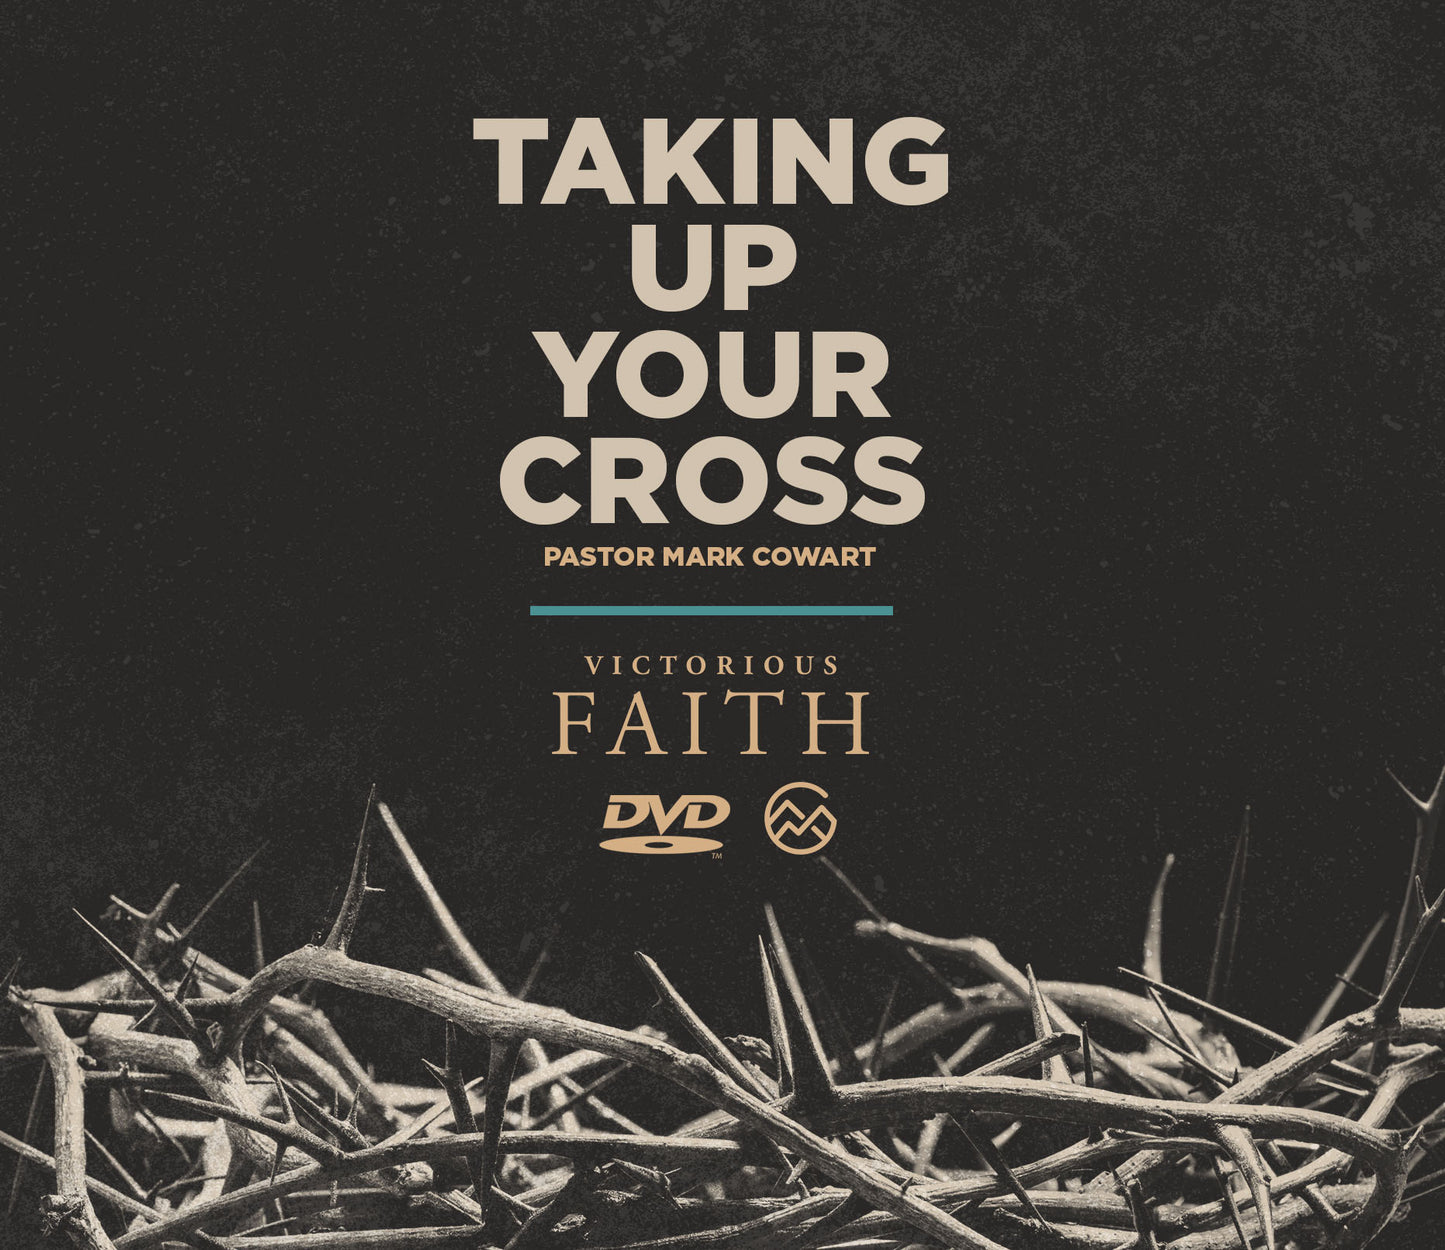 Taking Up Your Cross - Pastor Mark Cowart - Victorious Faith DVD format